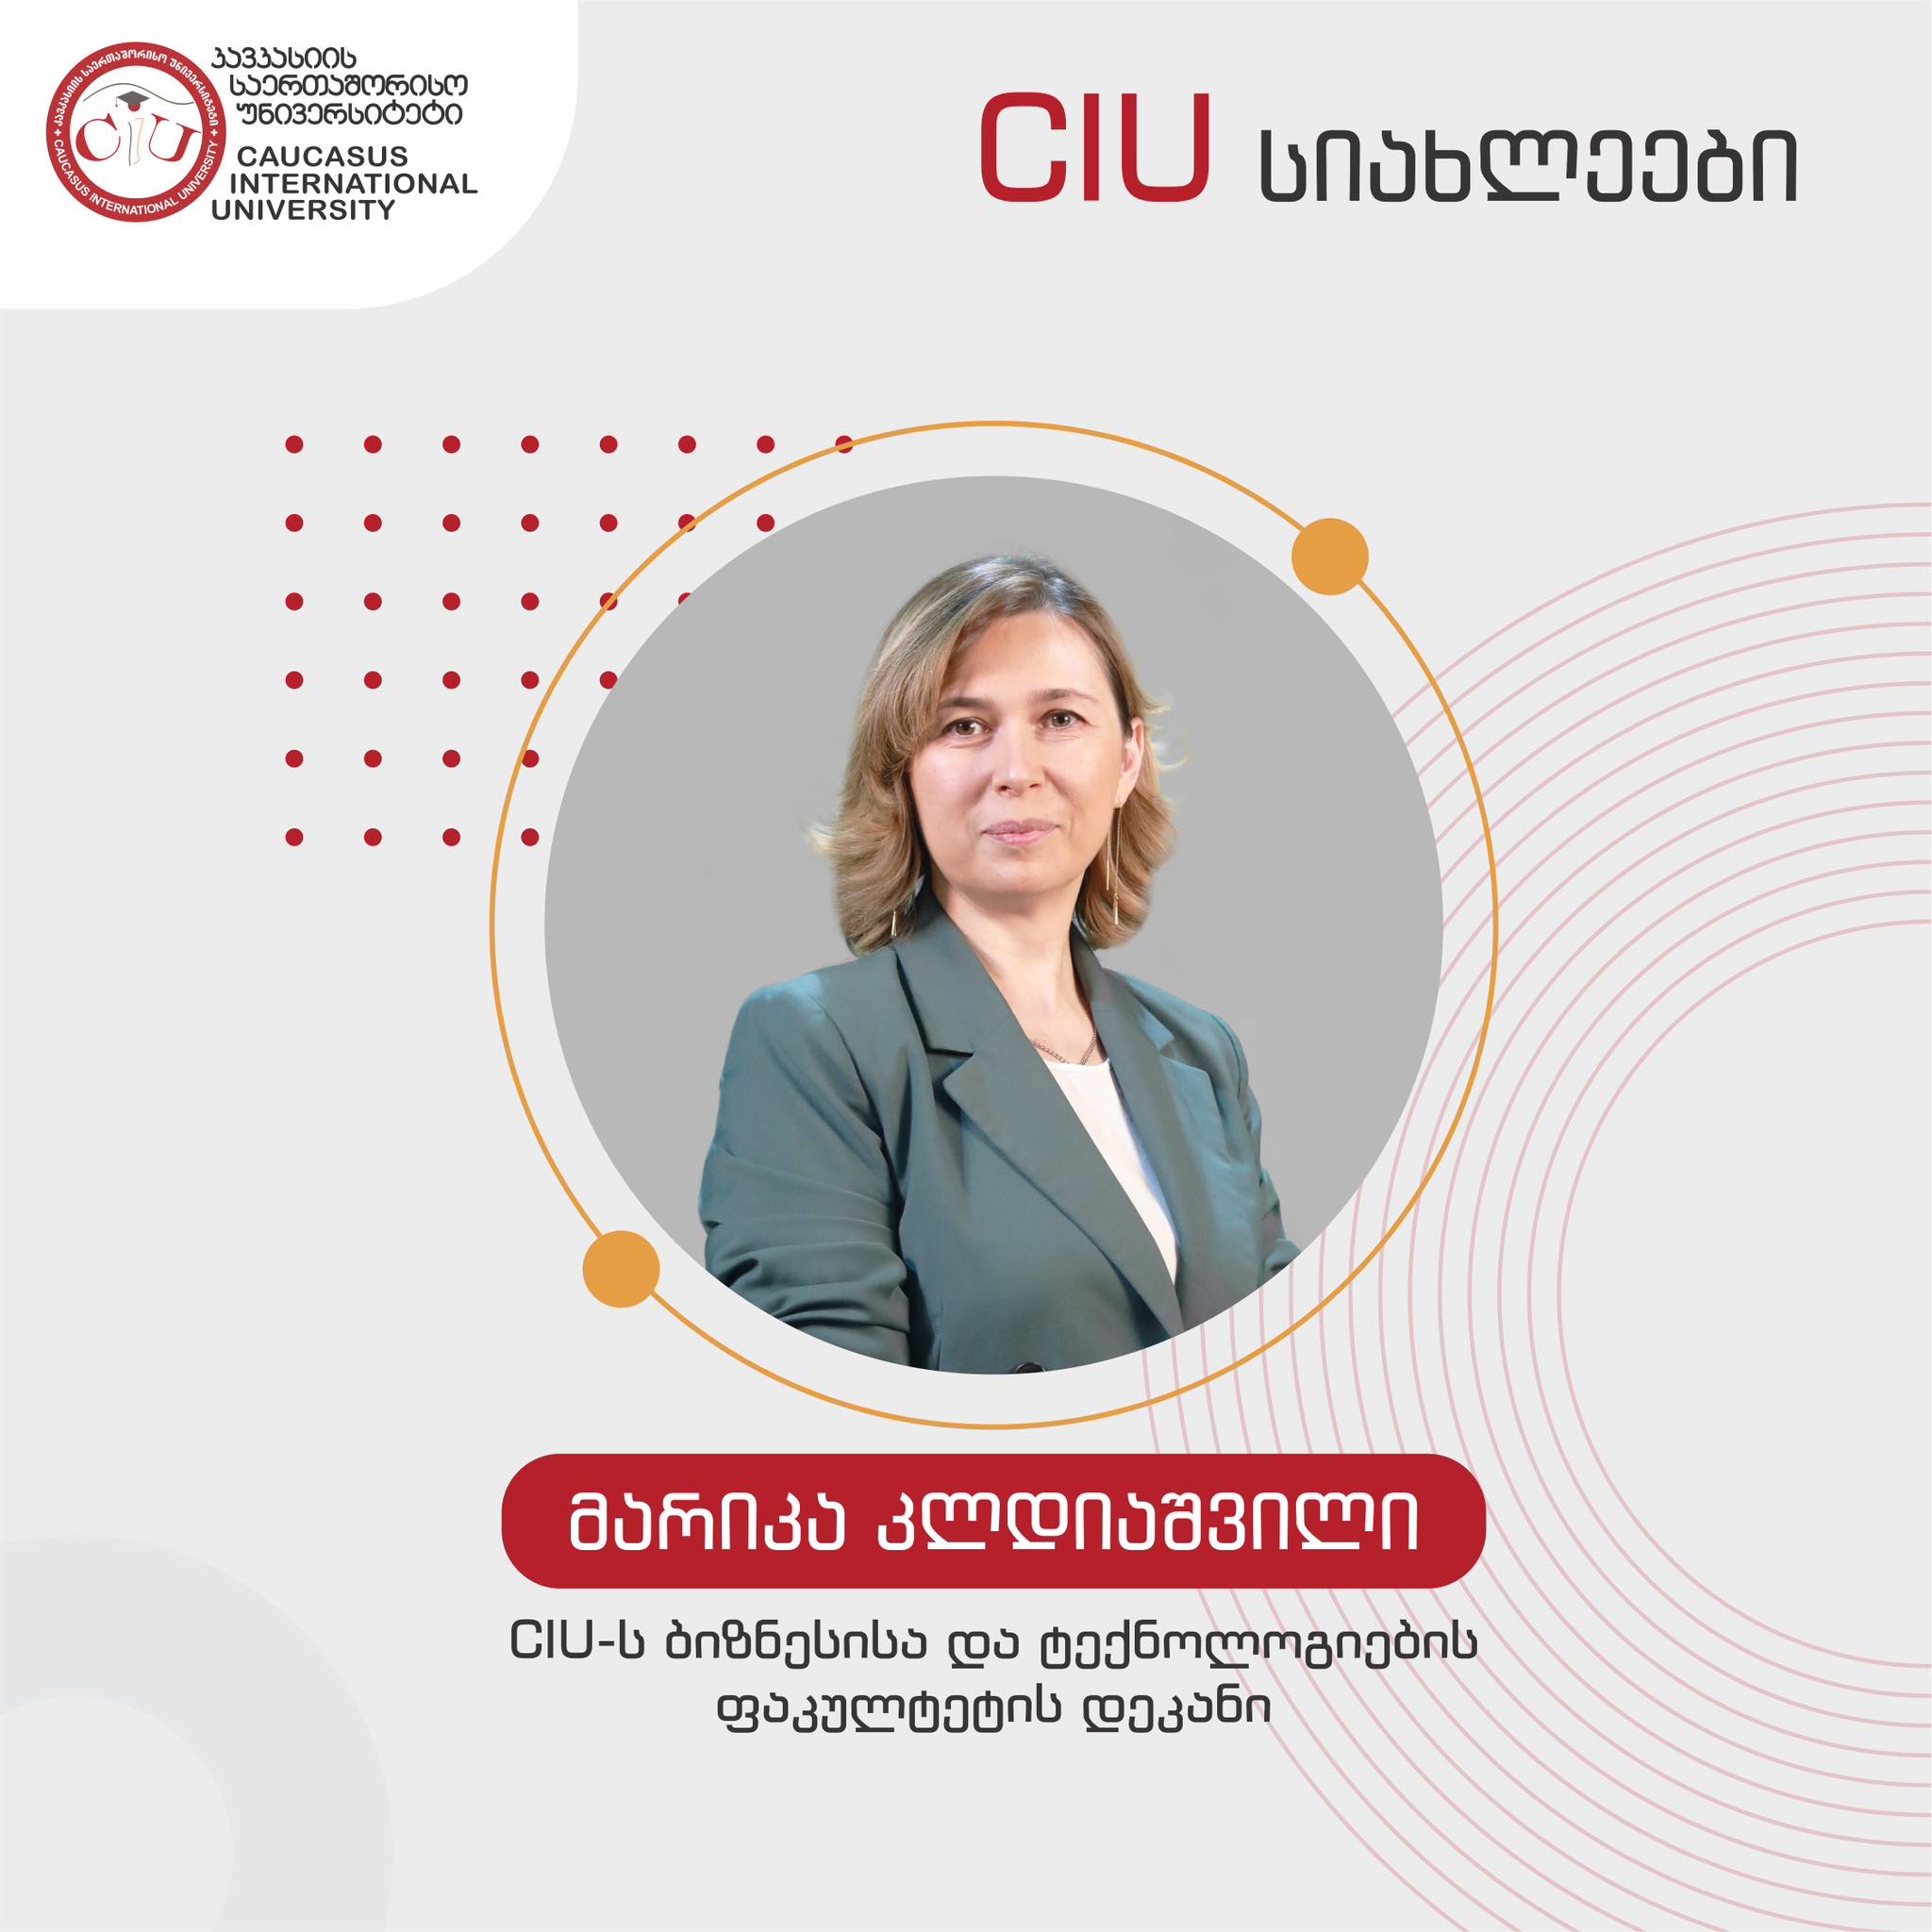 Marika Kldiashvili was Appointed to the Position of Dean of CIU Faculty of Business and Technology